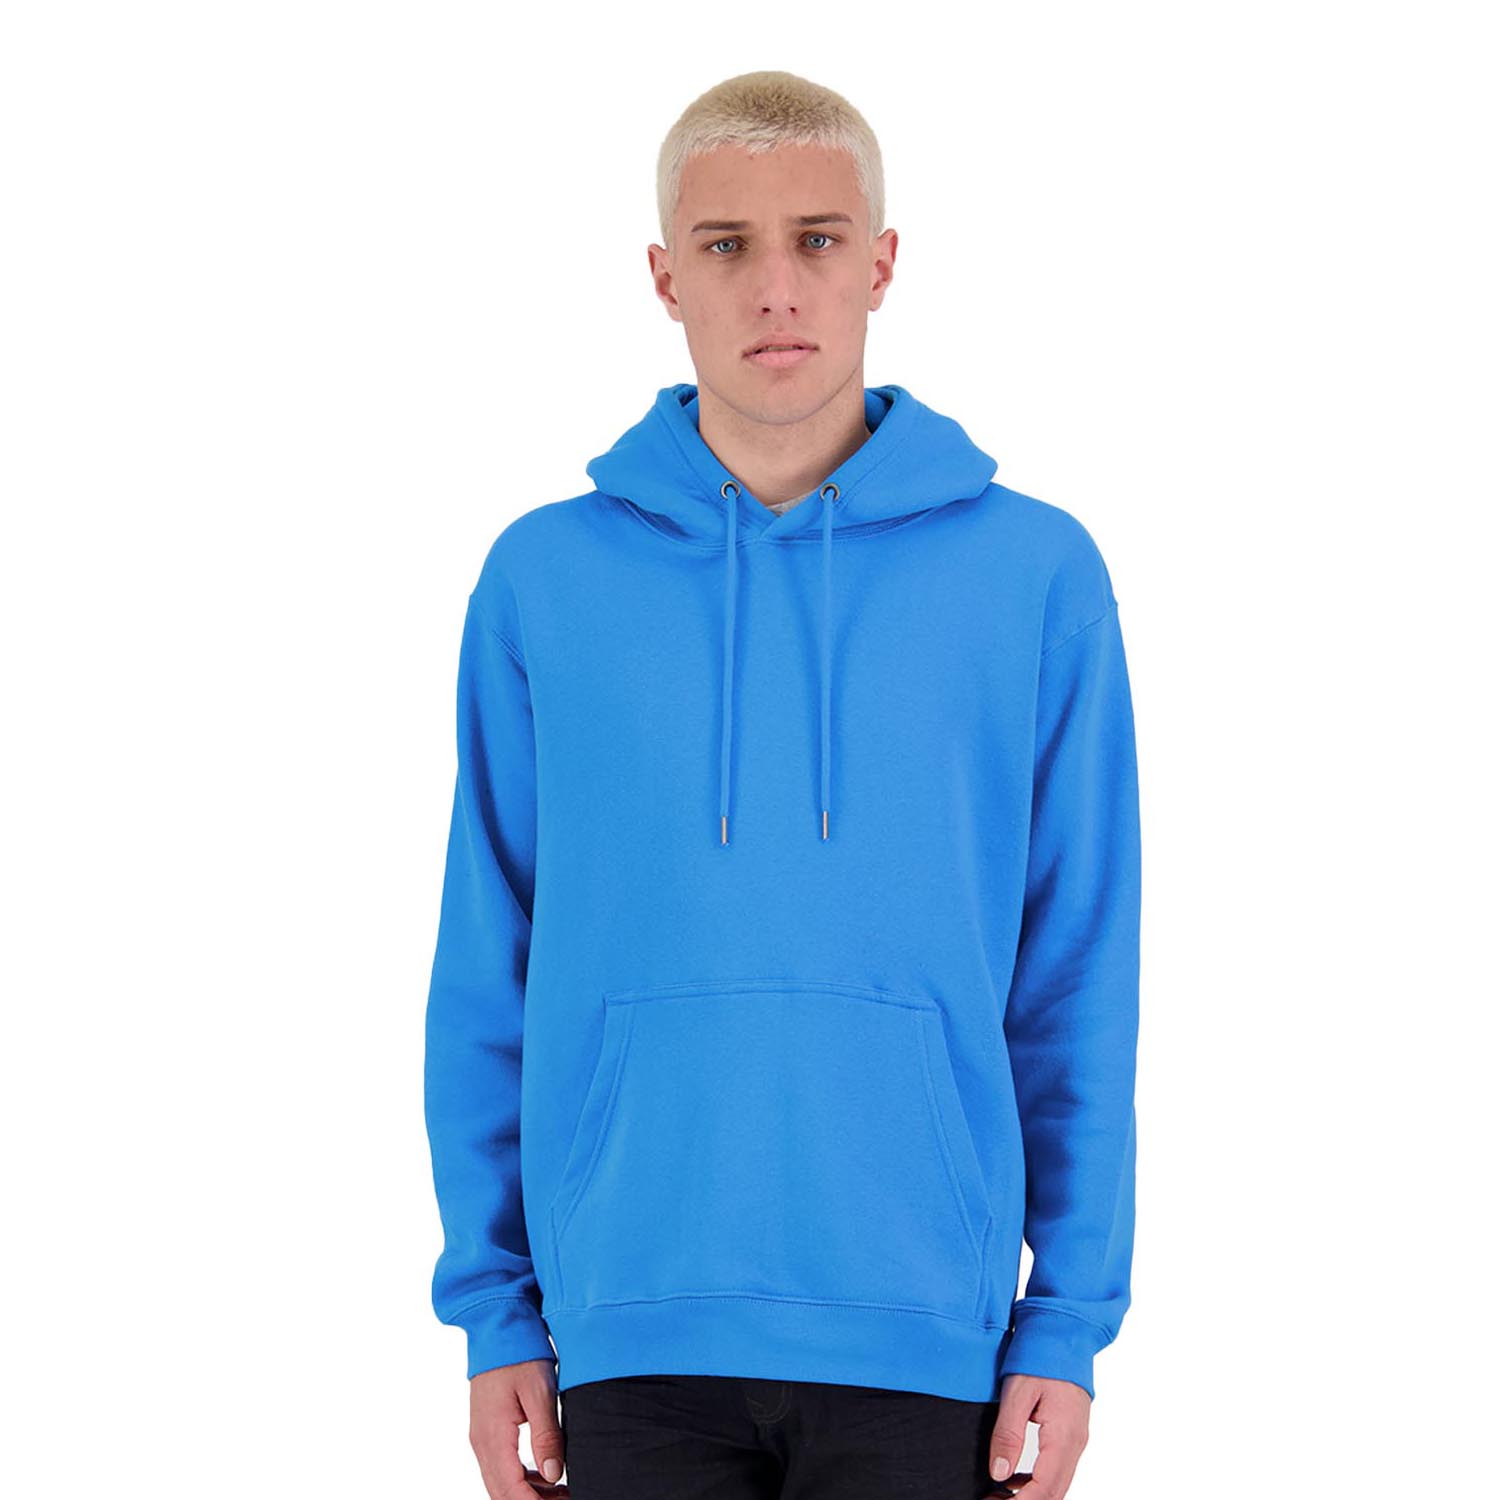 Mens Origin Hoodie in Model shot front. 80% cotton, 20% recycled polyester.